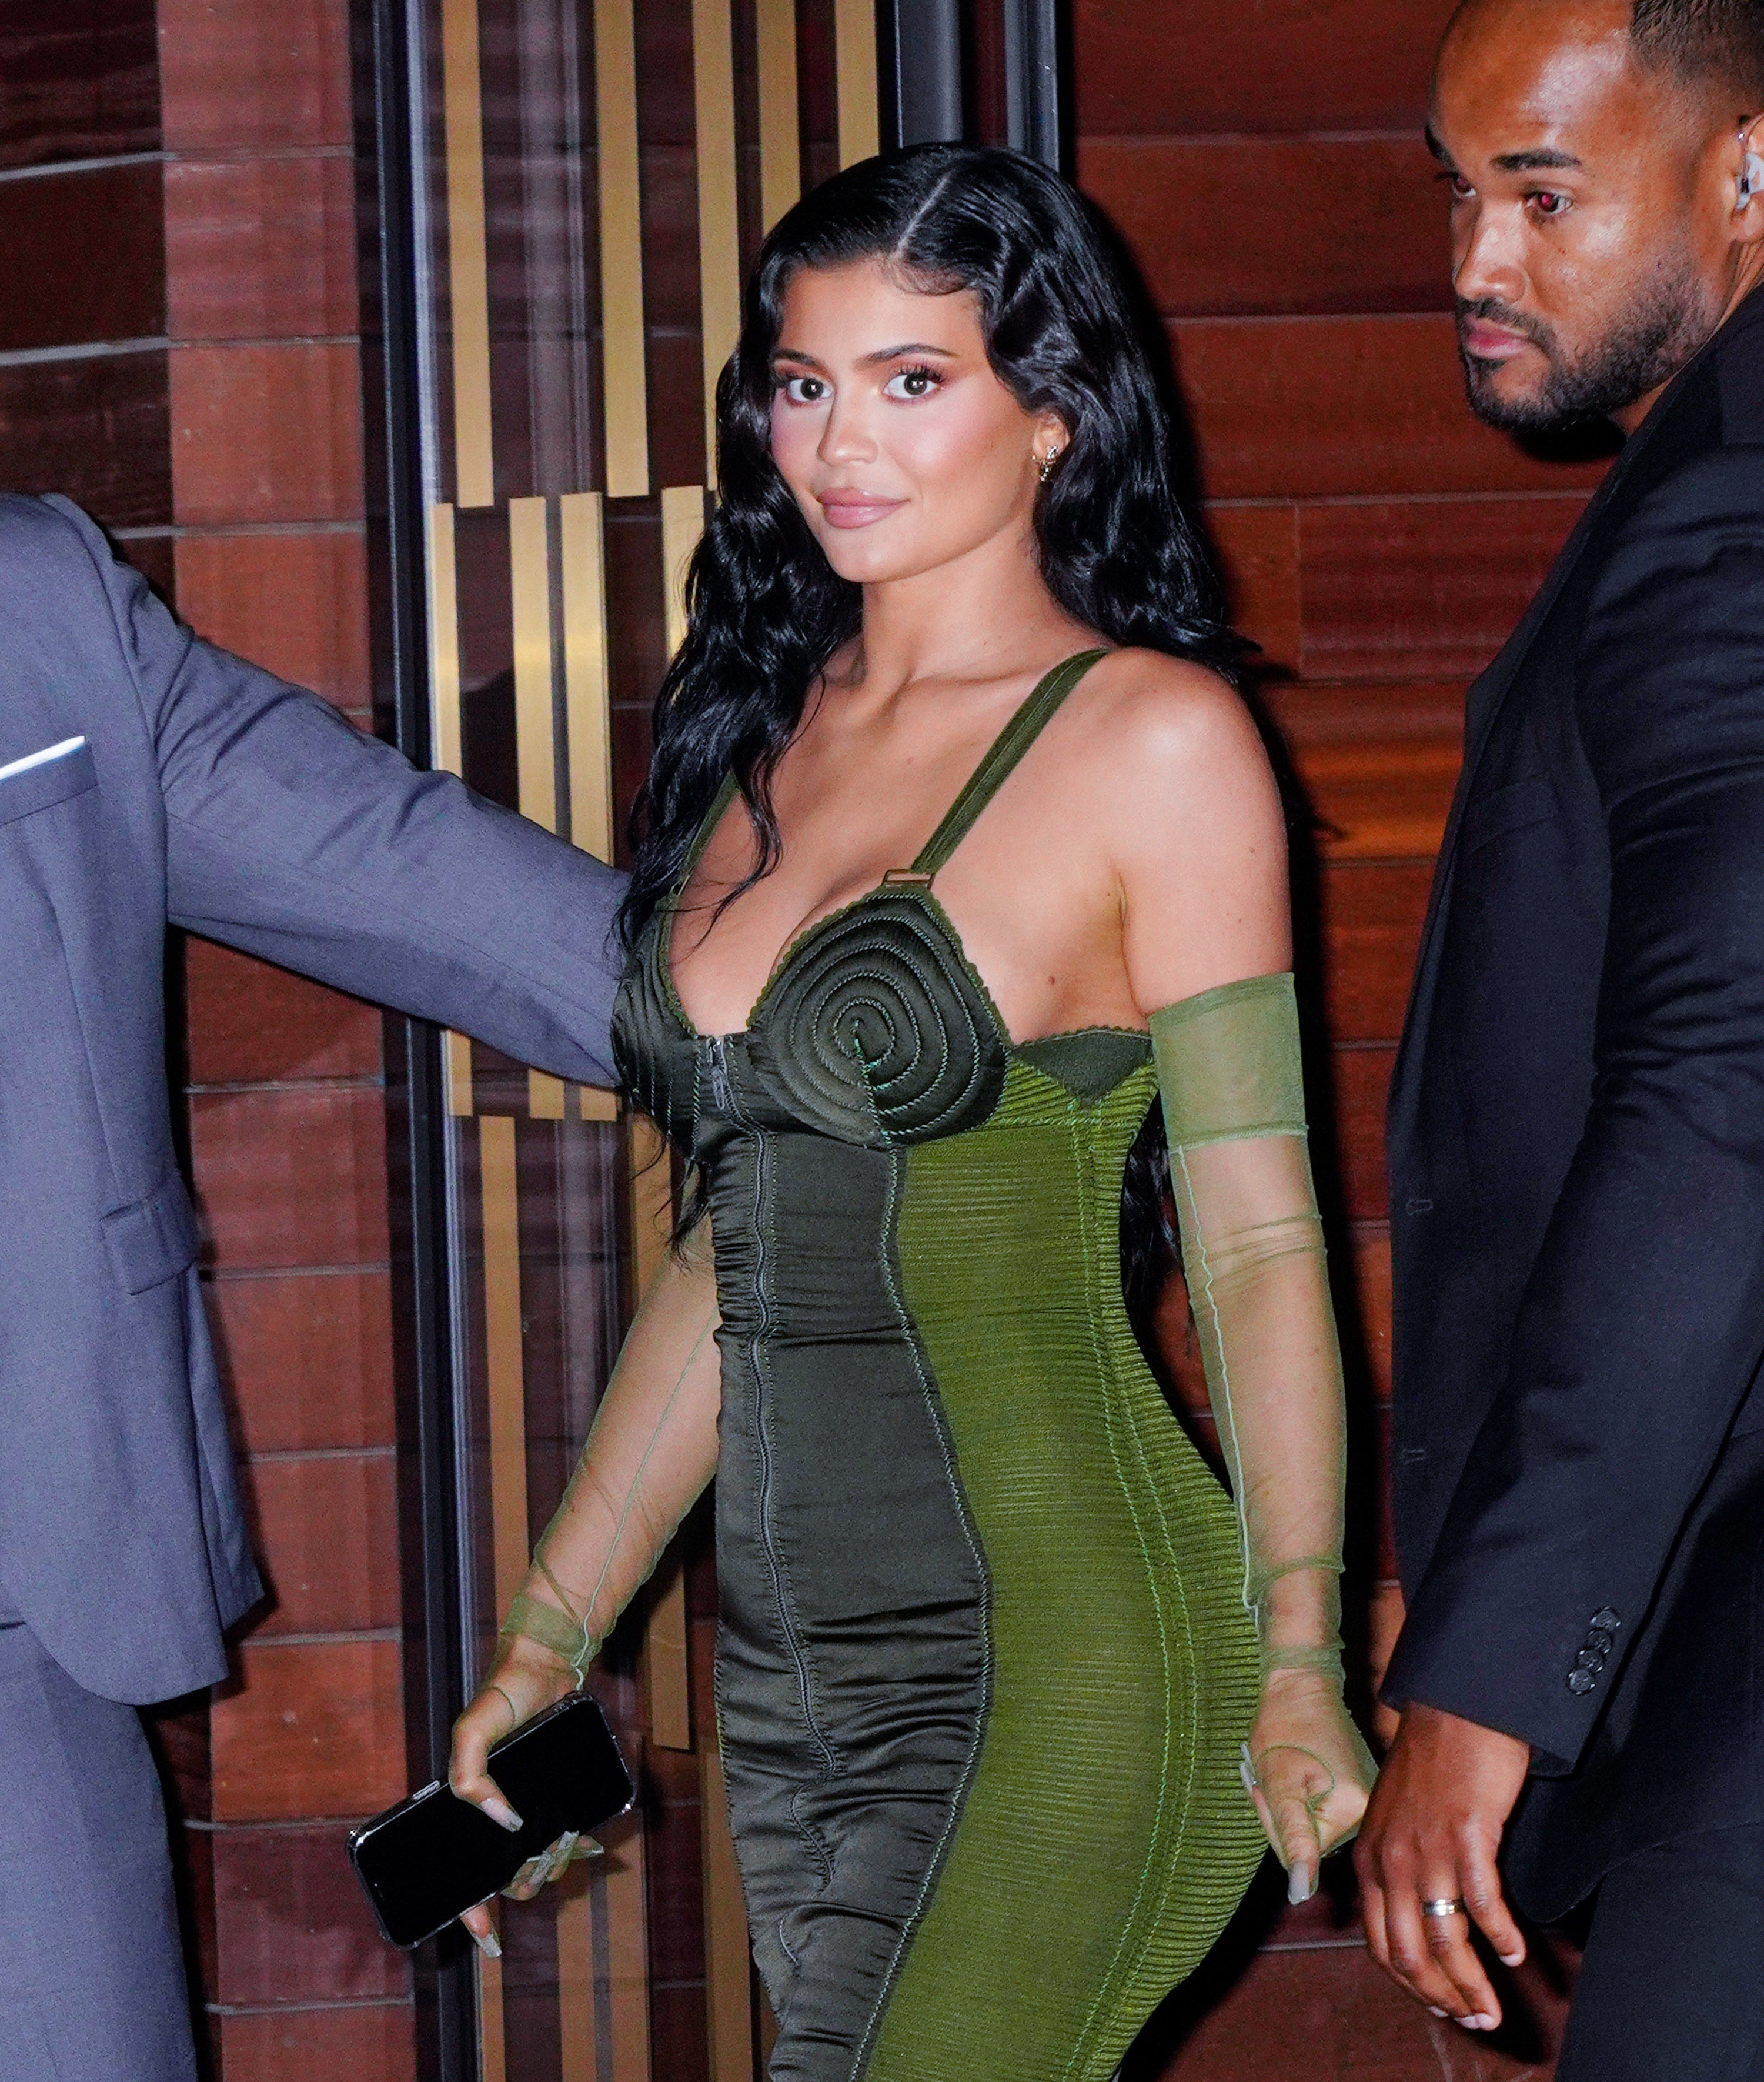 Kylie Jenner leaves the 2021 Parsons Award event on June 15, 2021